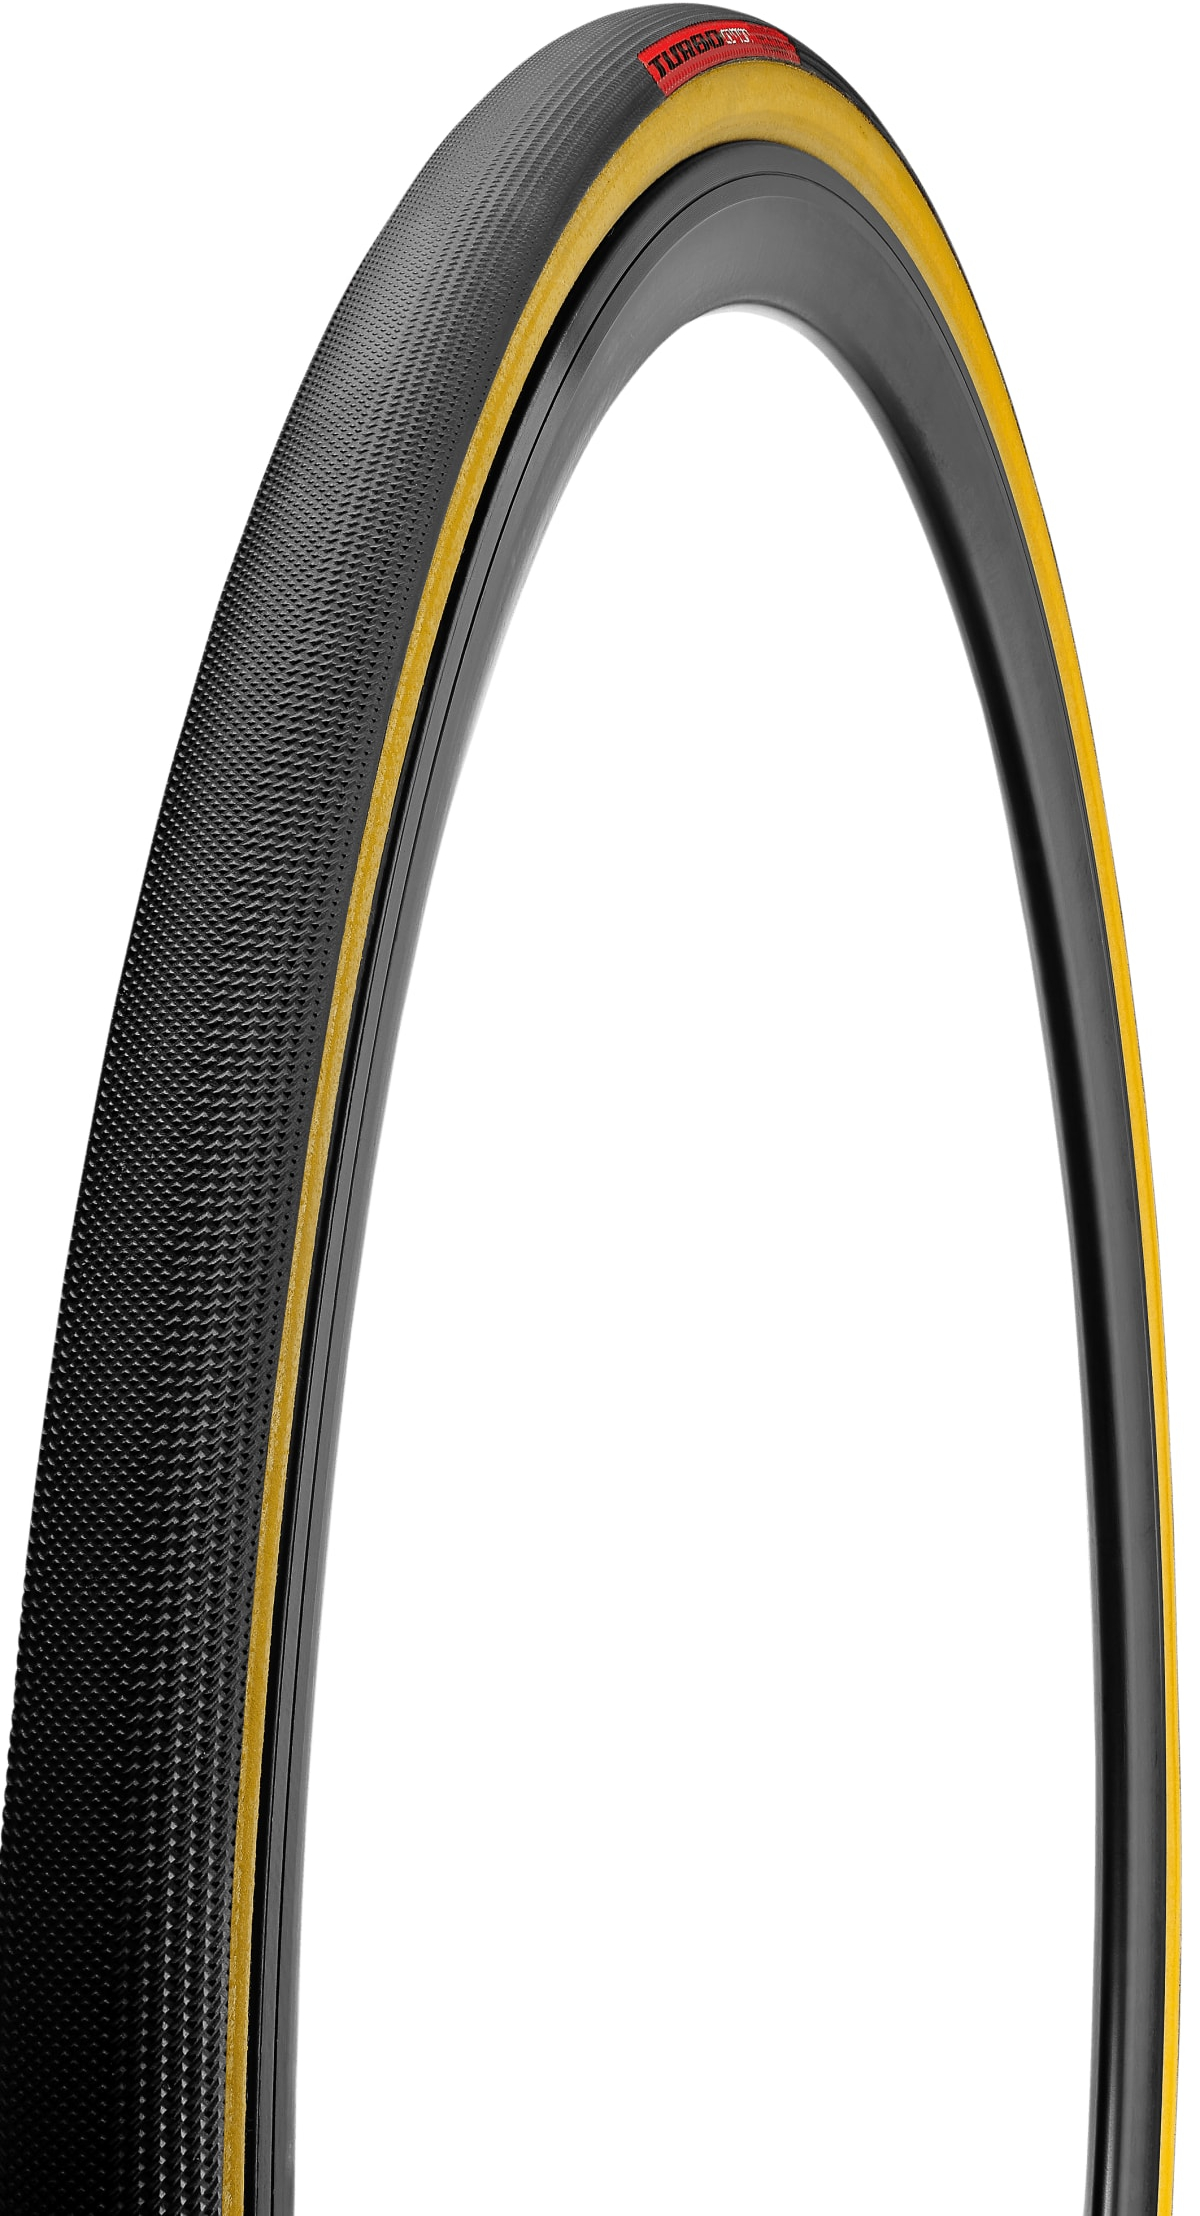 Specialized  Turbo Cotton Hell of the North Road Tyre 700x28c 700 X 28 Black/Transparent Sidewall